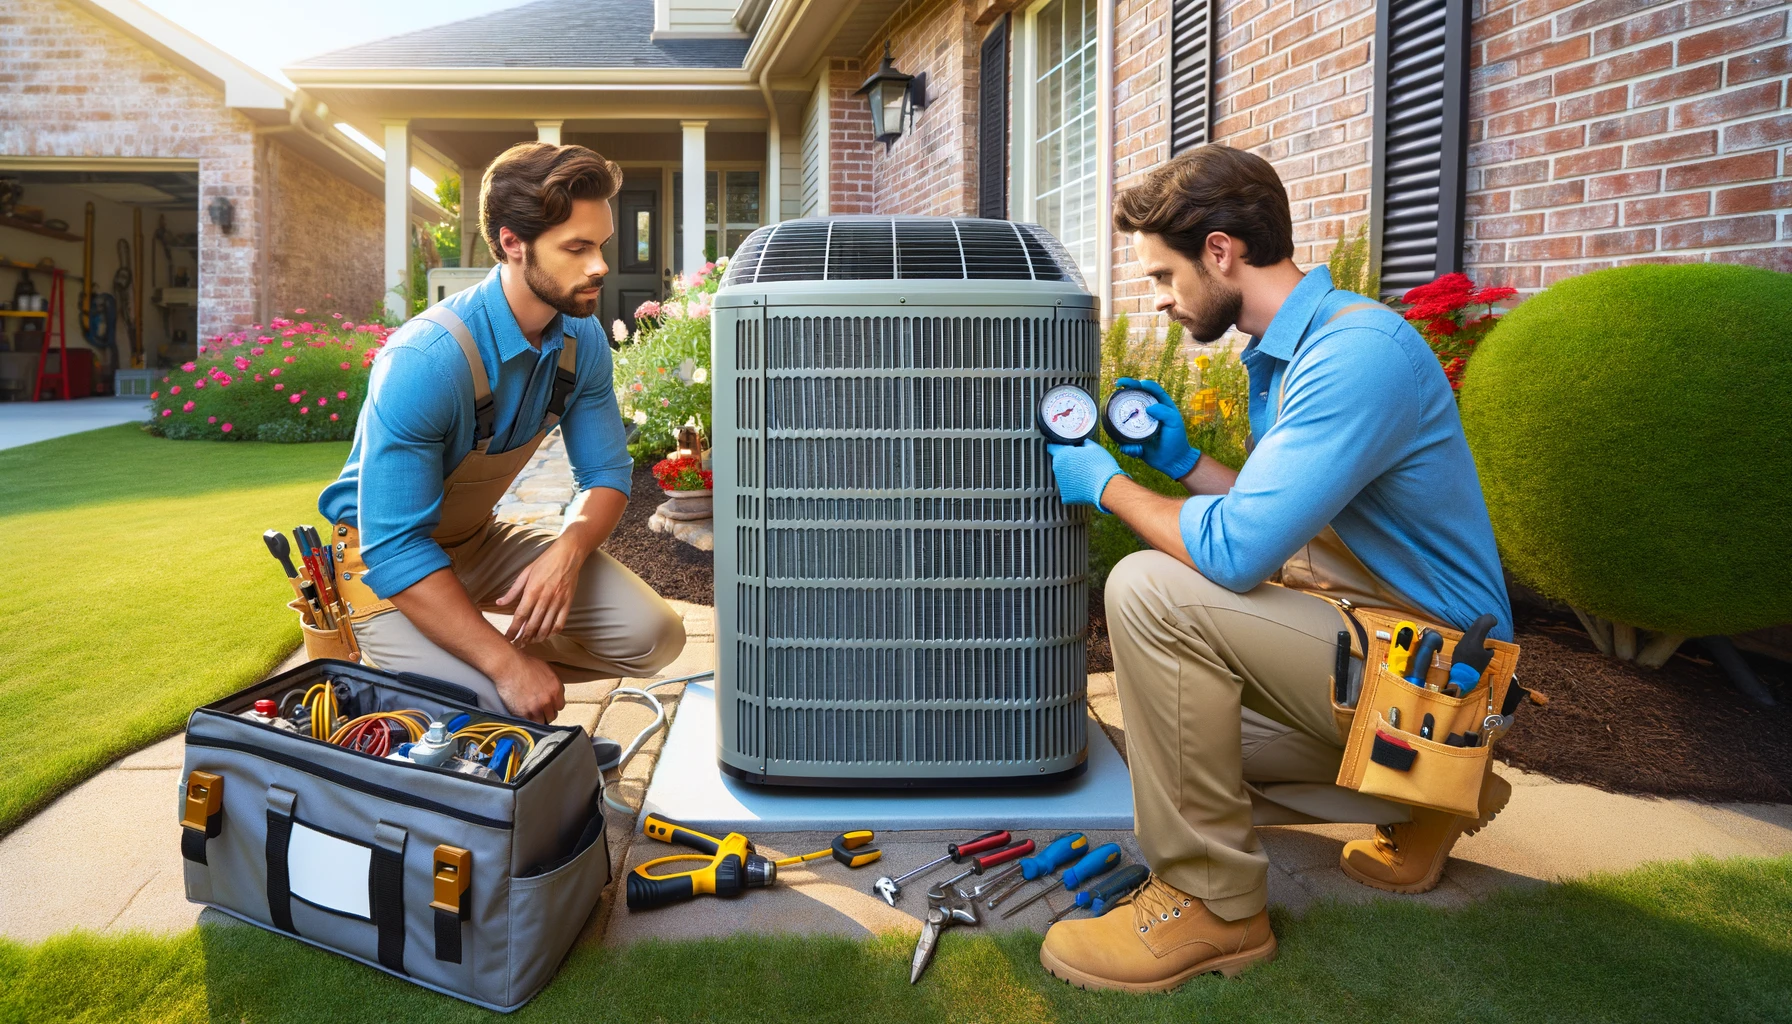 Is Your Air Conditioning Ready for Summer?